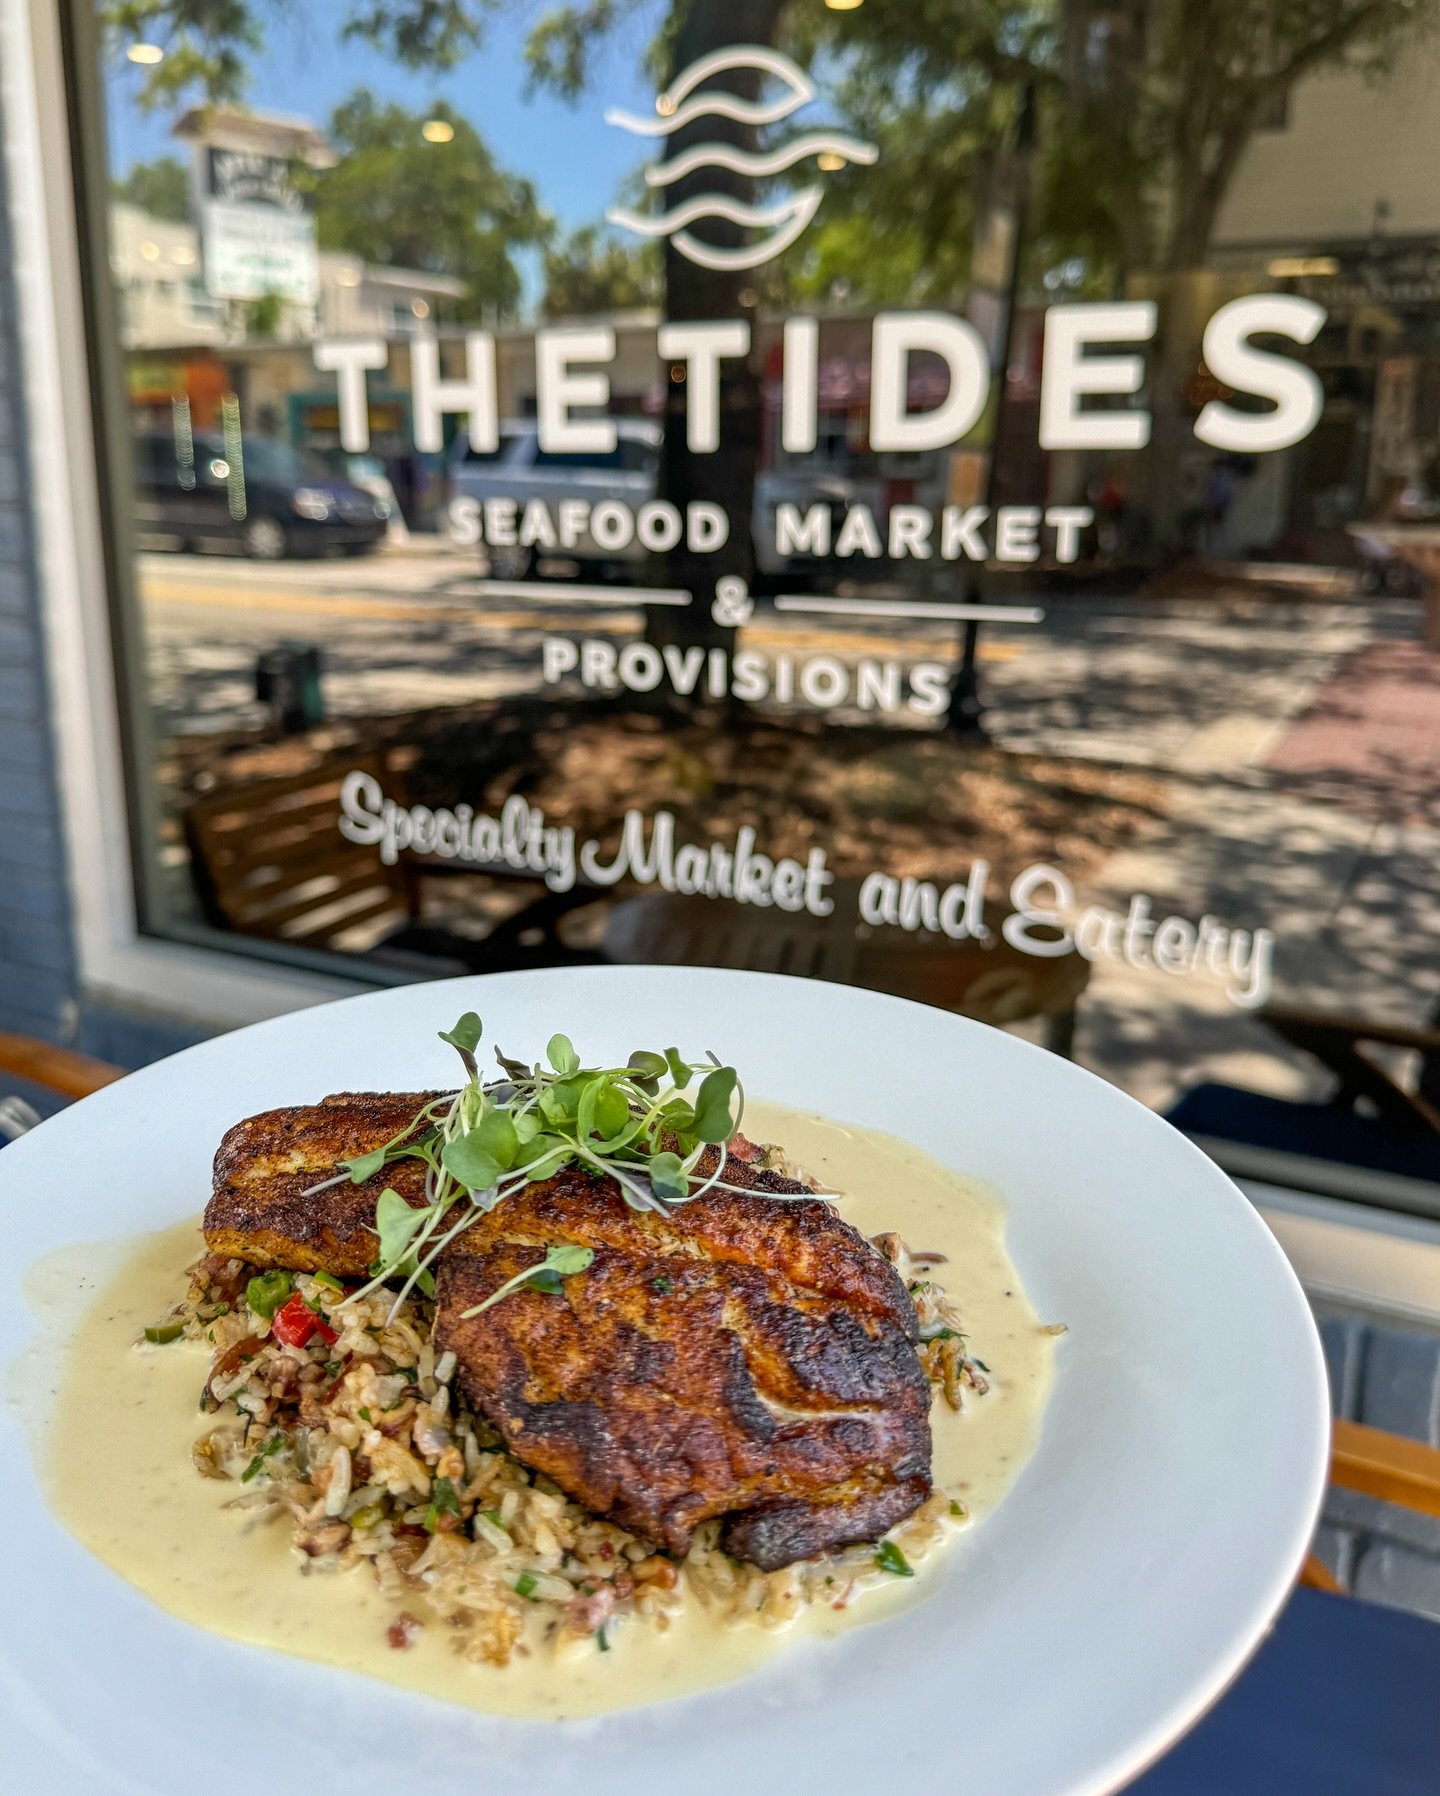 It's a beautiful day for our Blackened Yellowtail Snapper with lemon beurre blanc and pecan dirty rice! 😋 

#TheTidesMarket #SafetyHarbor #SeafoodRestaurant #TampaEats #TampaFoodie #TBeatsout #Snapper